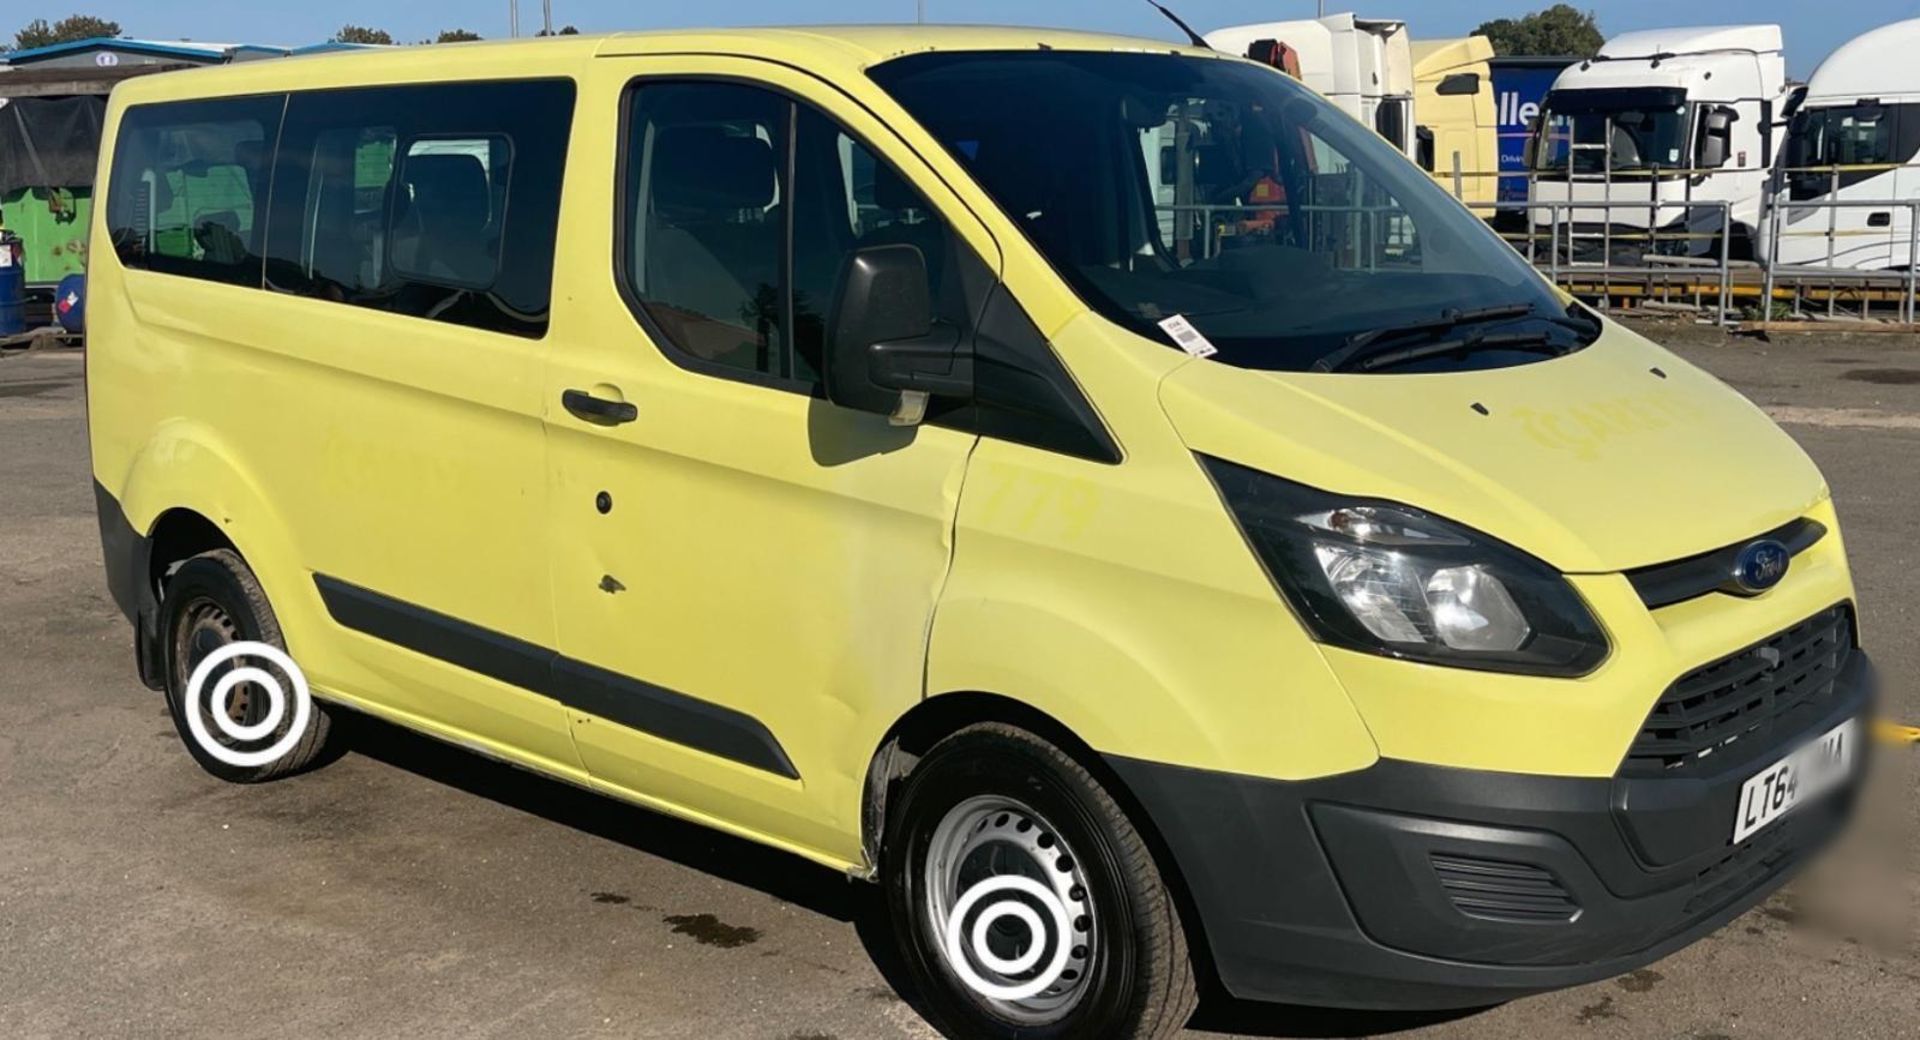 2014 FORD TRANSIT CUSTOM MINI BUS -170K MILES- HPI CLEAR- READY FOR ACTION!